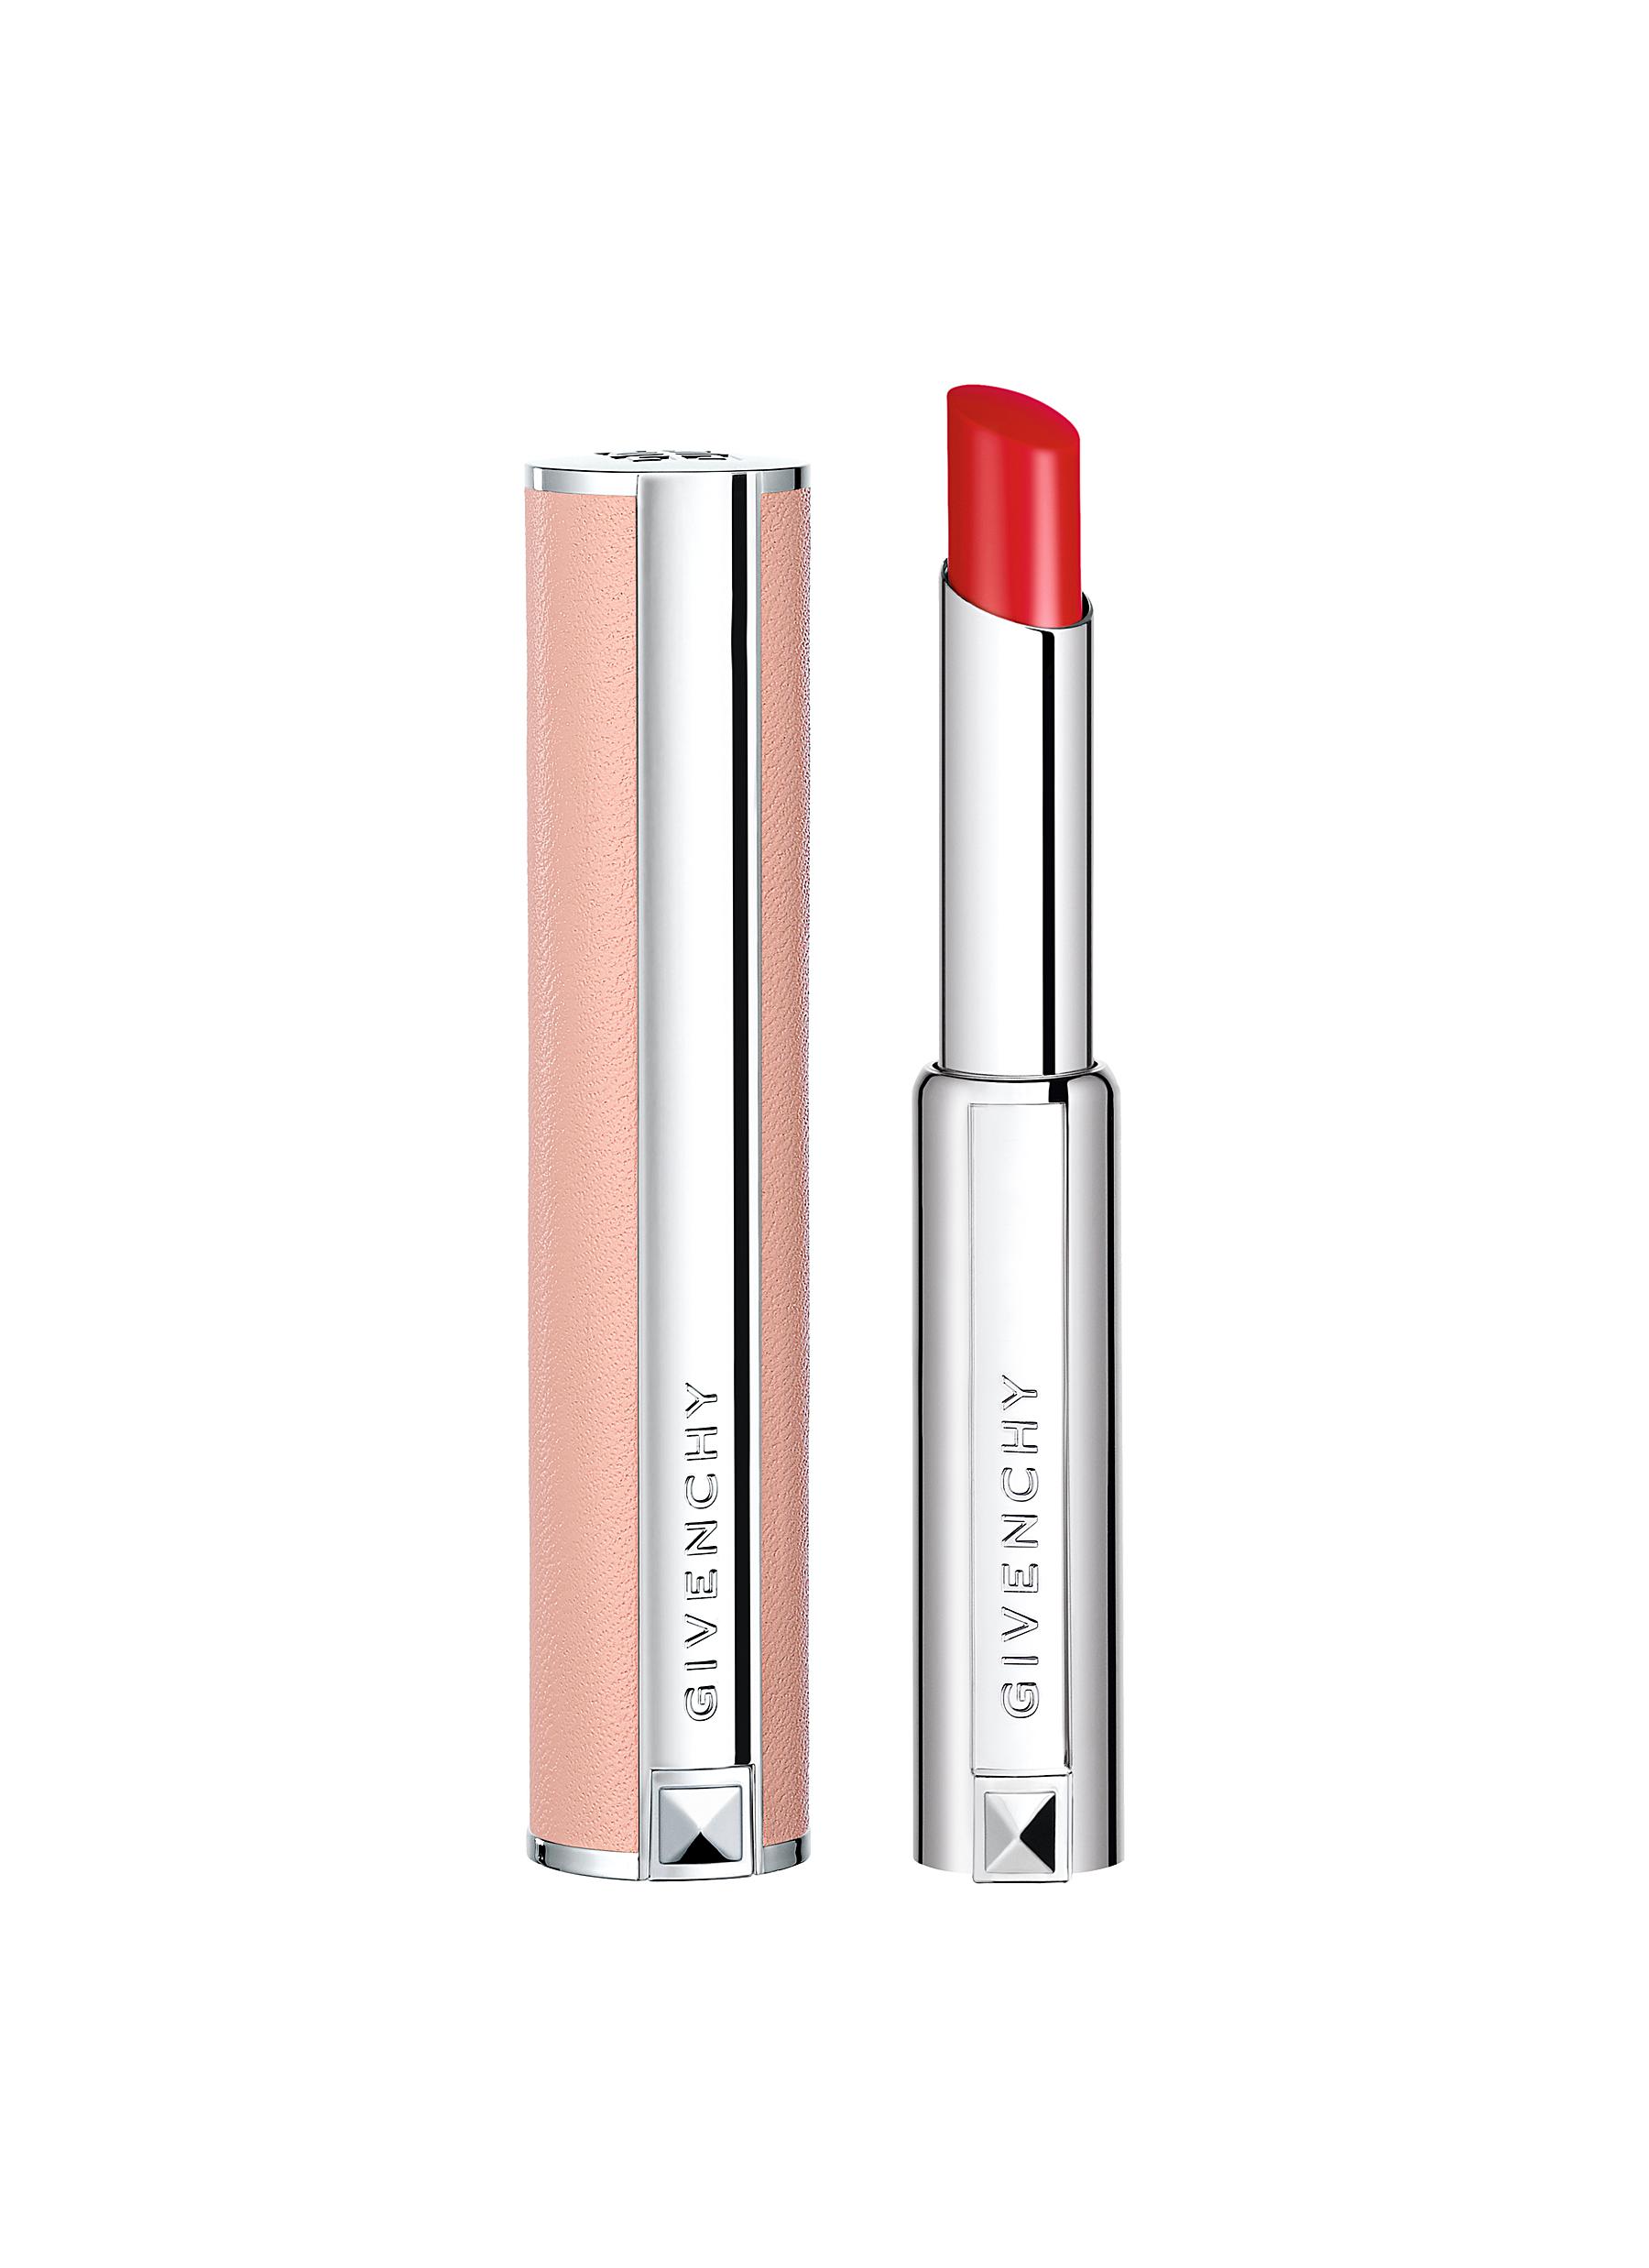 GIVENCHY BEAUTY | Le Rose Perfecto Lip Balm – N°301 Soothing Red | Beauty |  Lane Crawford